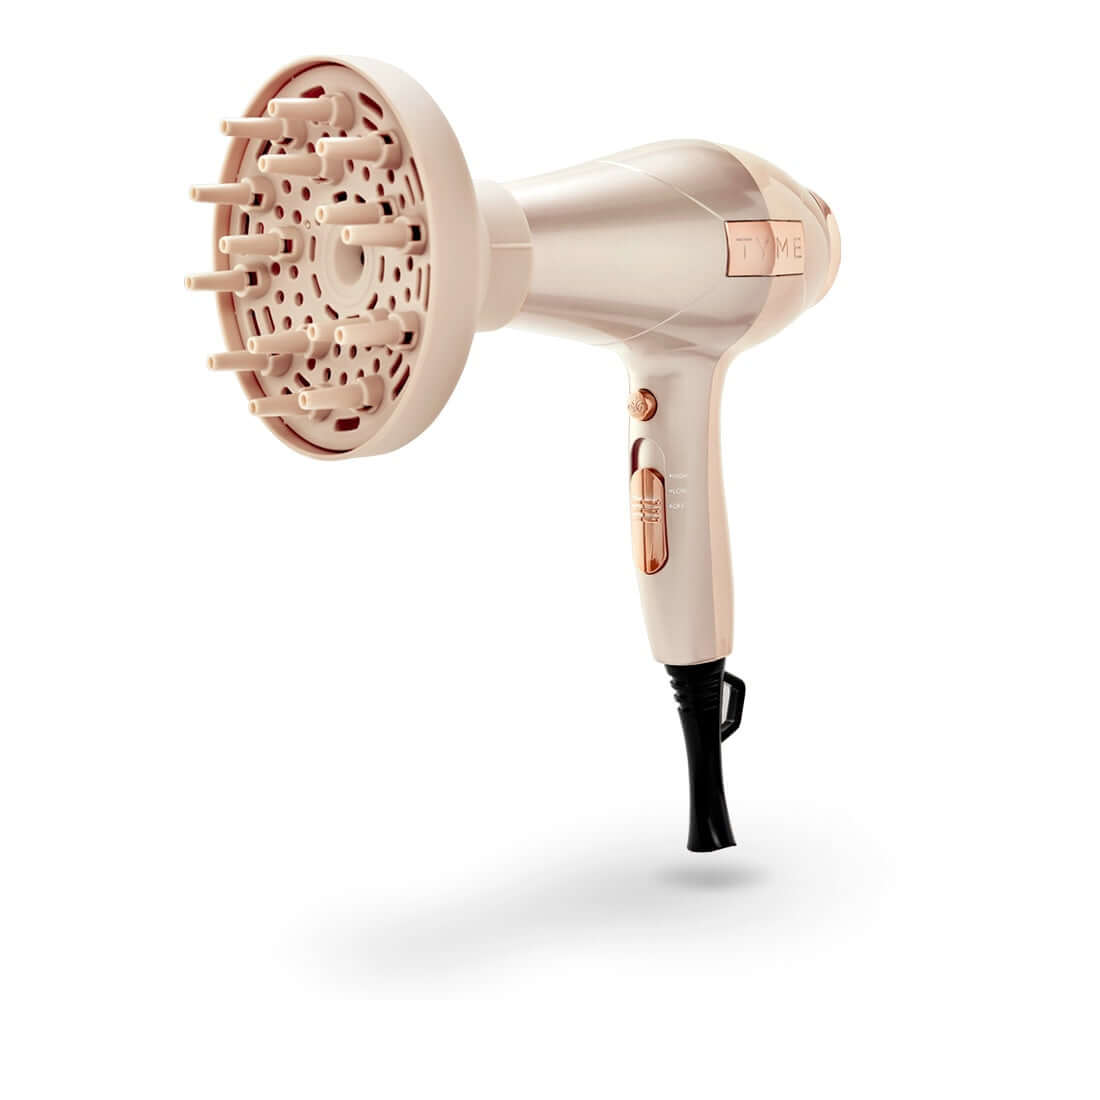 Side of pale taupe and rose gold TYME BlowTYME Hair Dryer with included beige diffuser attached.